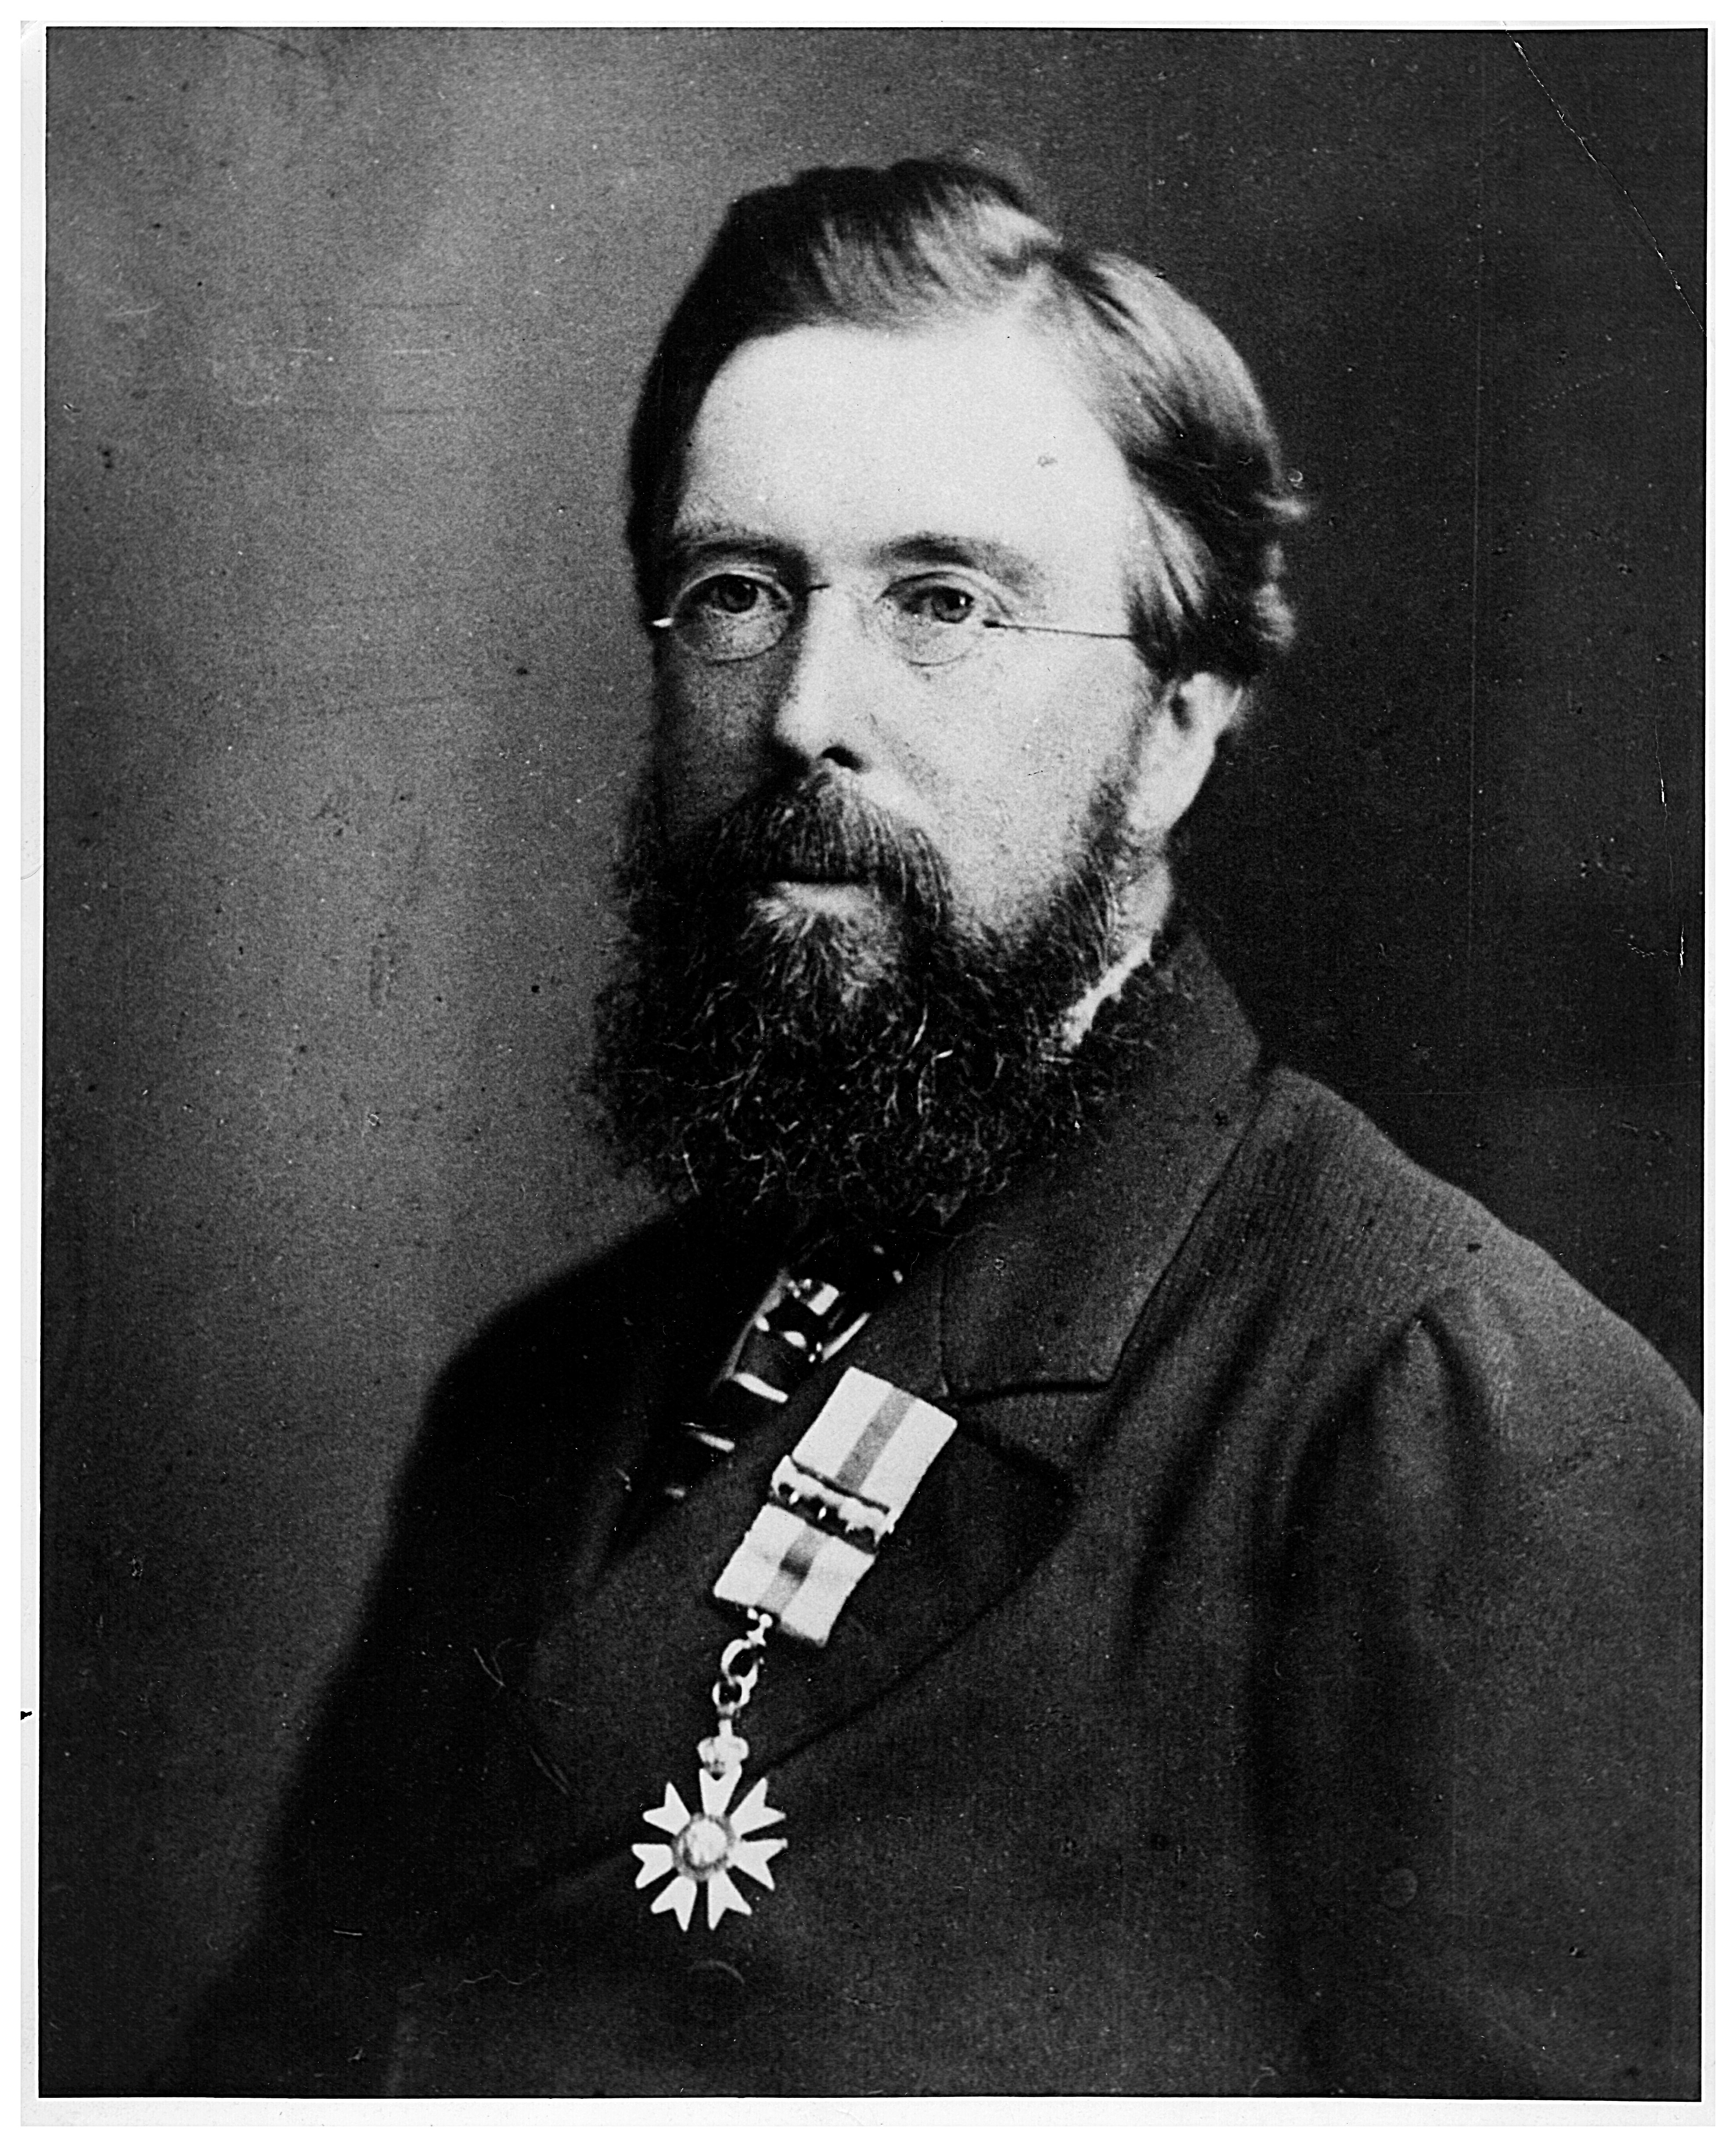 Figure 7. Charles Todd with the Order of St Michael and St George medal, 1880